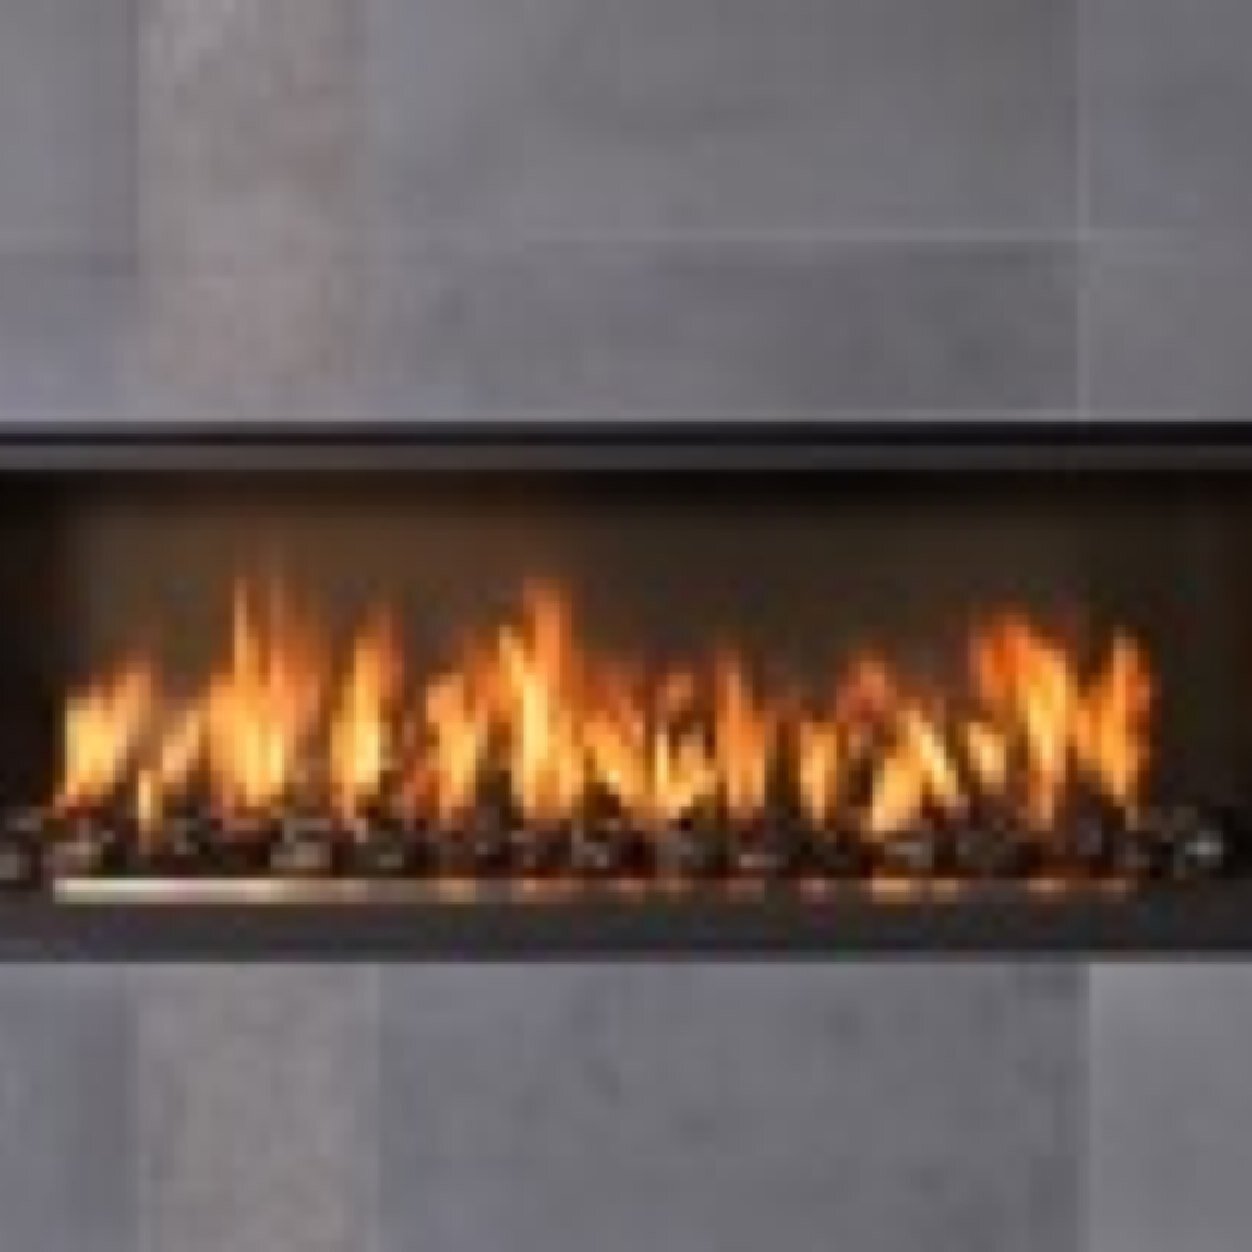 Mackenzie Fireplaces. Gas and Electric fireplaces since 1990. 905-879-0176